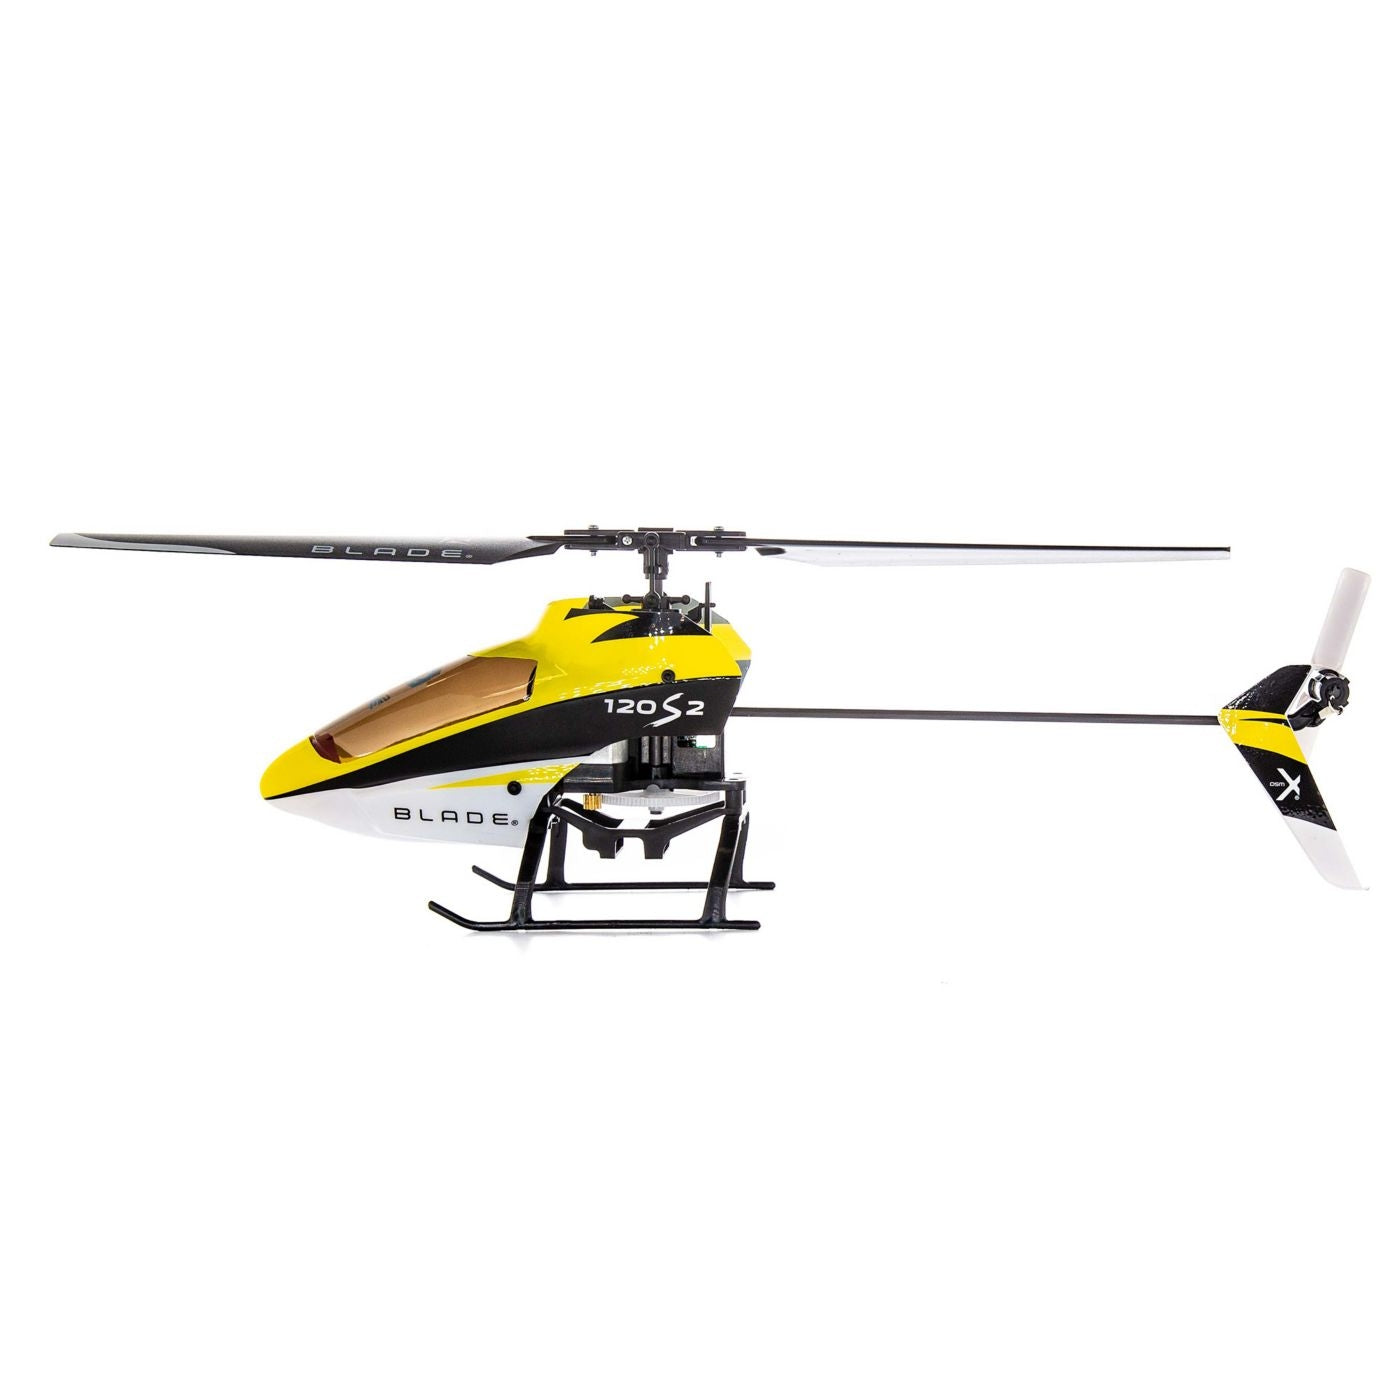 Blade 120 S2 RTF with SAFE Technology BLH1180